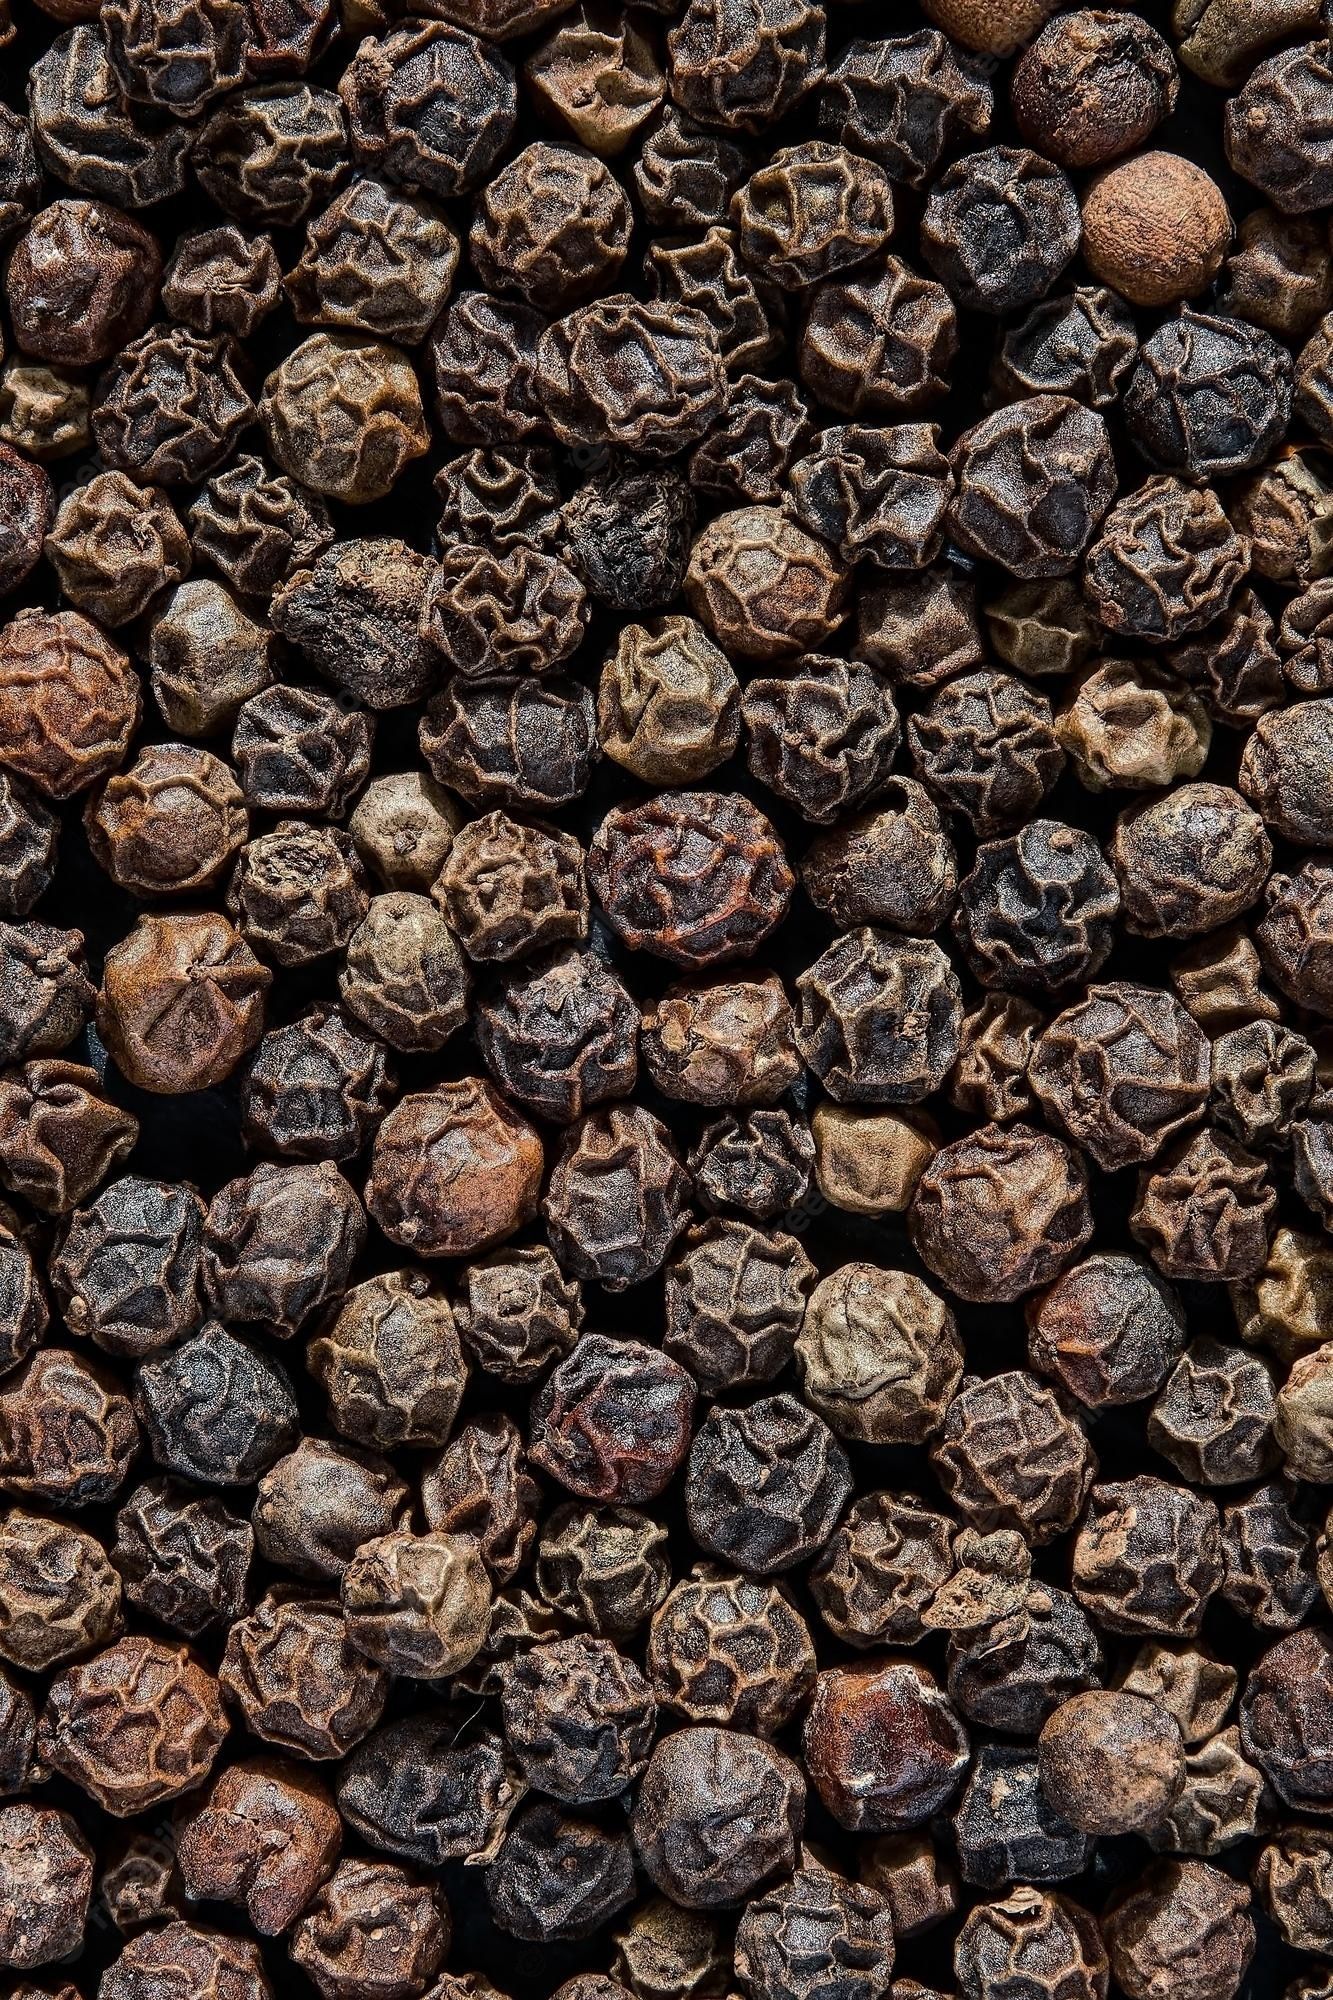 Where Does Black Pepper Come From? And How to Use It